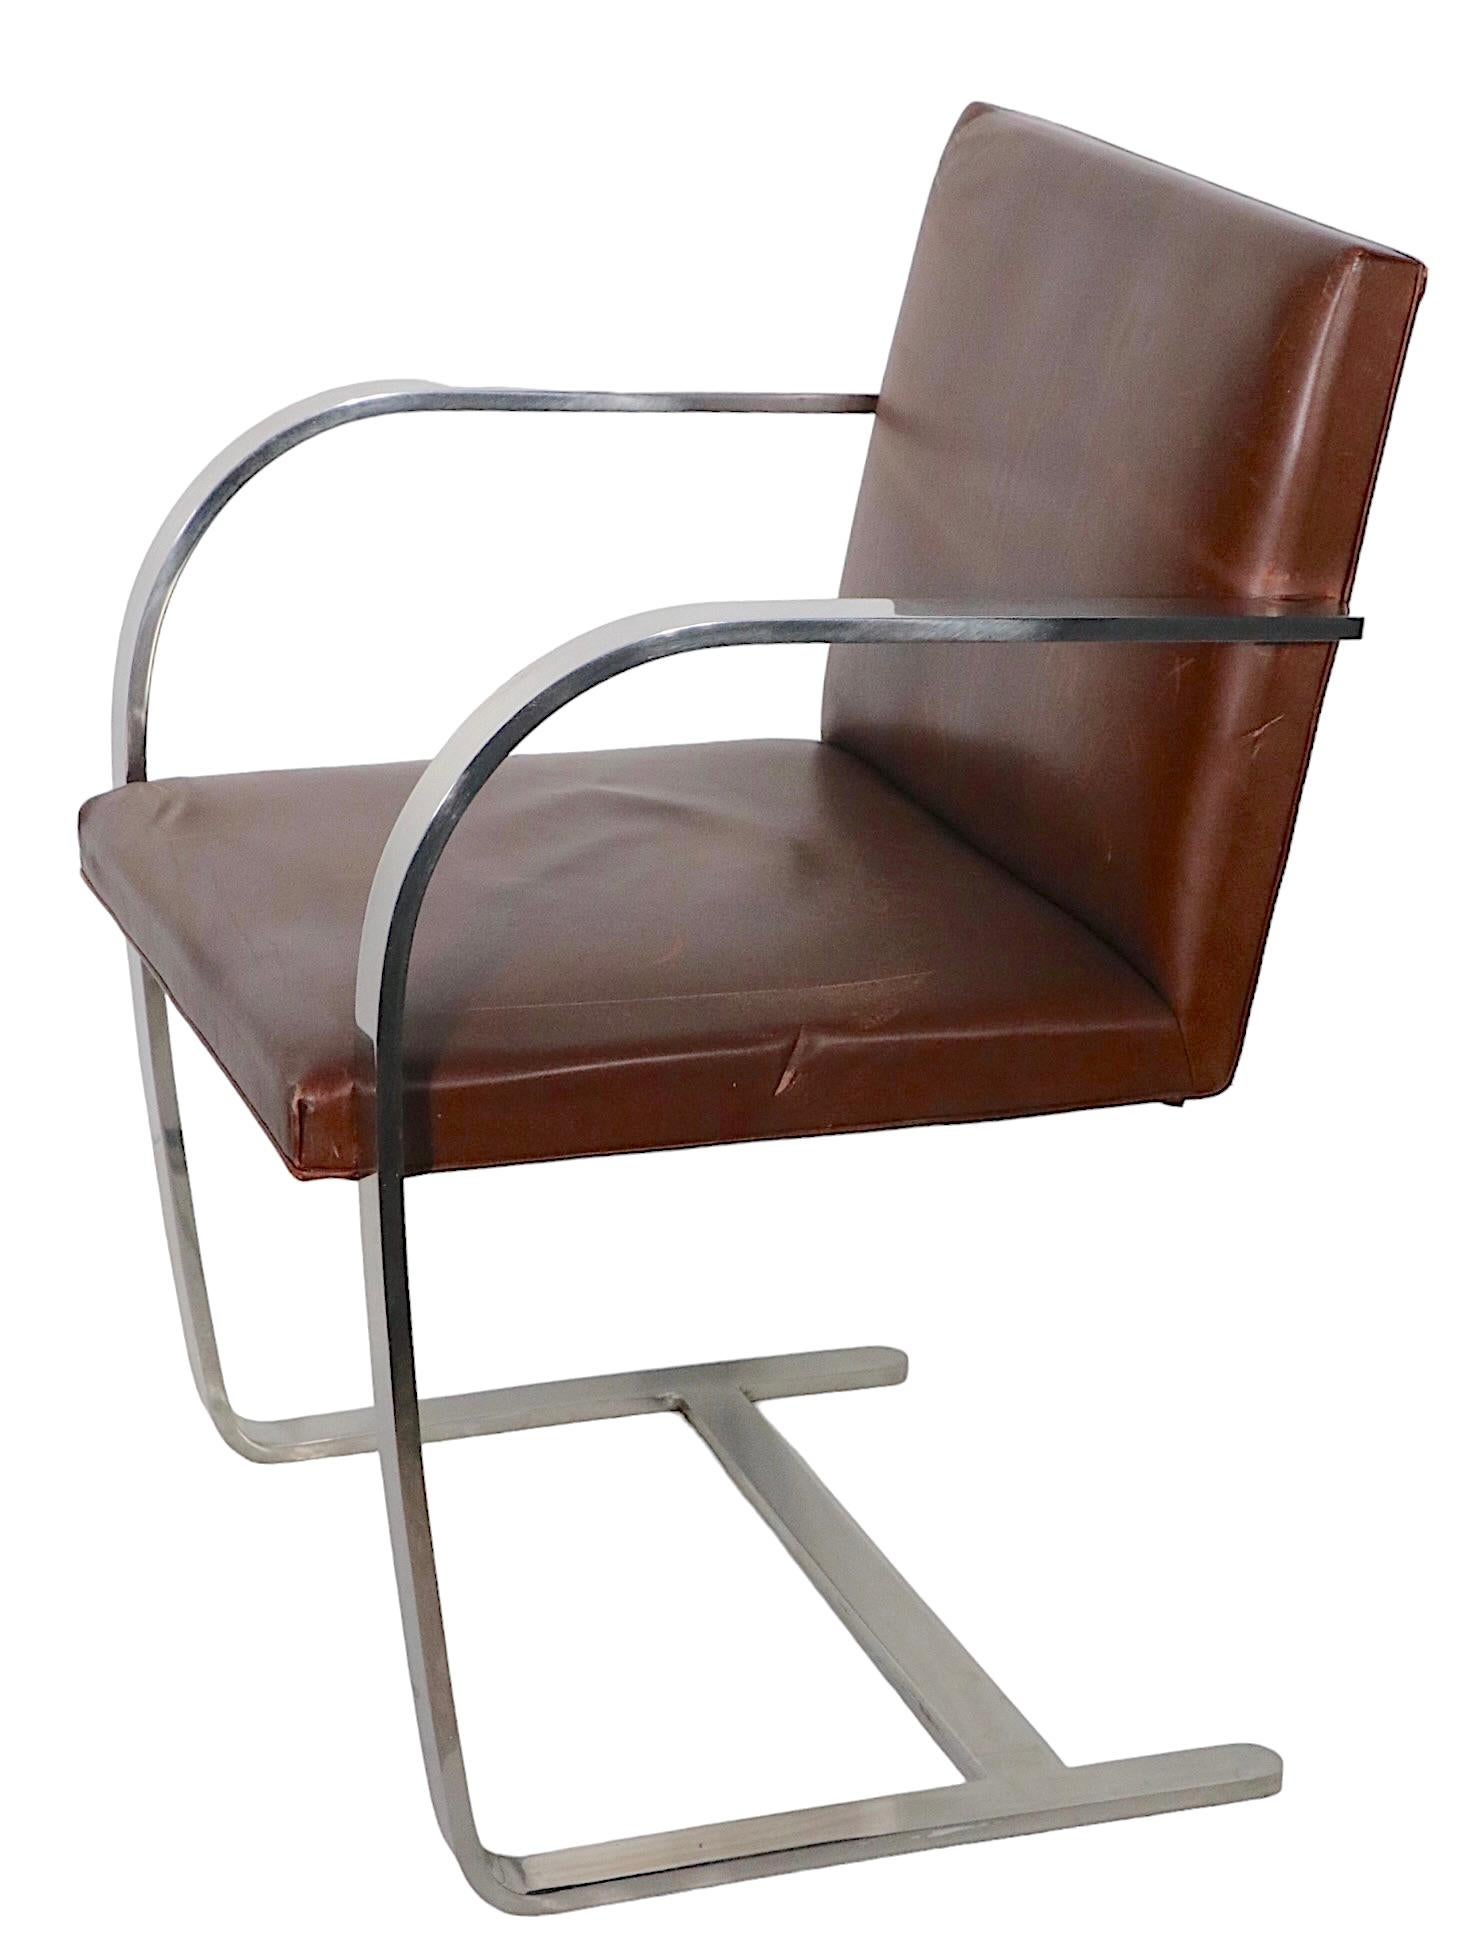 Pr. Meis Van Der Rohe Designed Brno Chairs by Knoll in Brown Leather 11